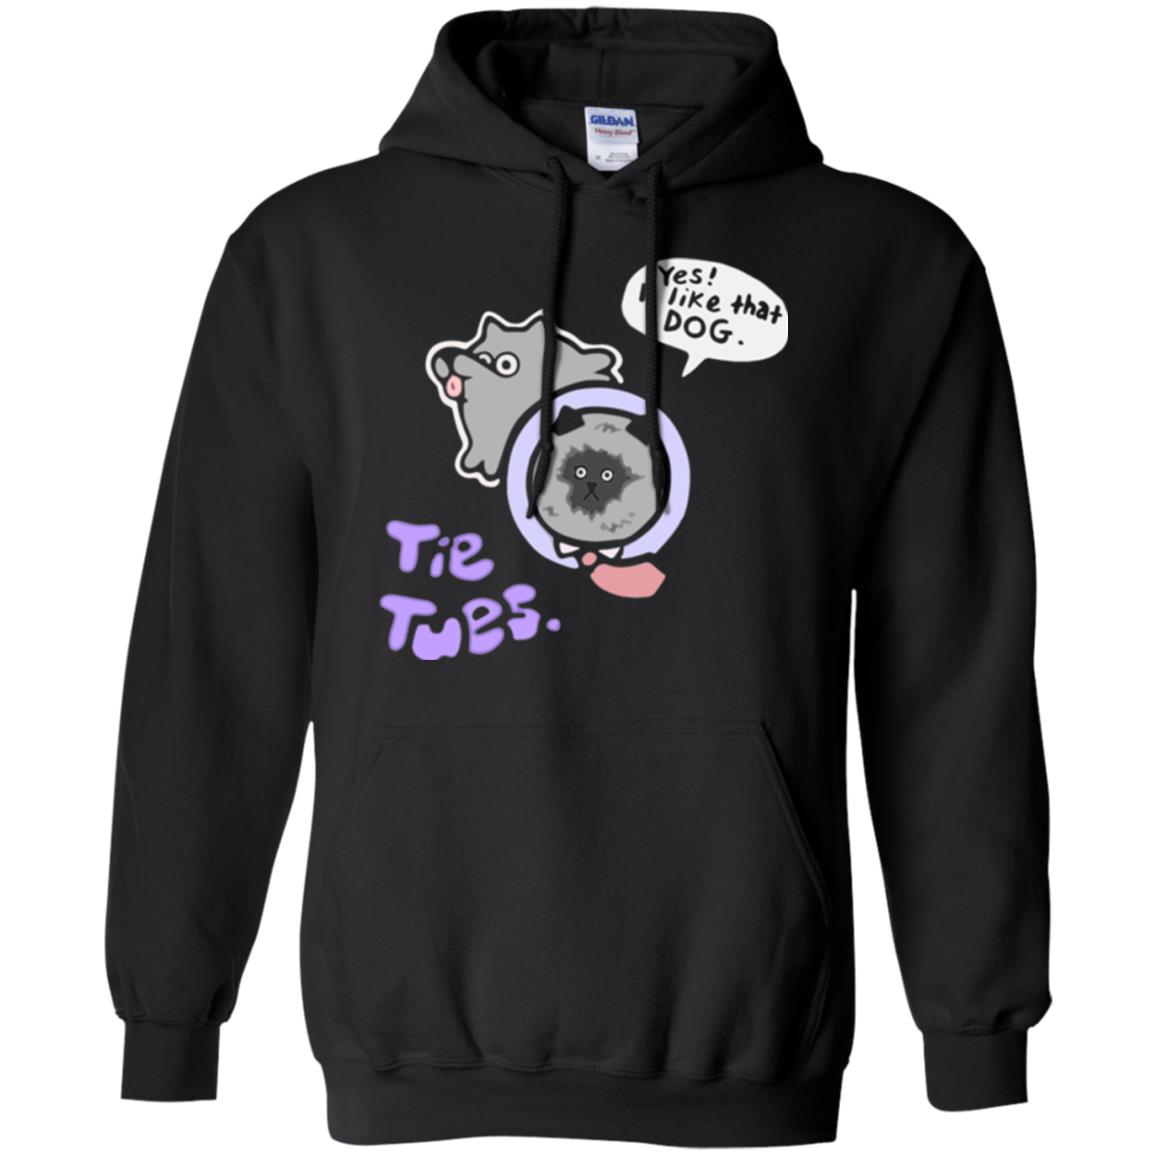 Yes I Like That Dog Tietuesday Dog Lover T-shirt